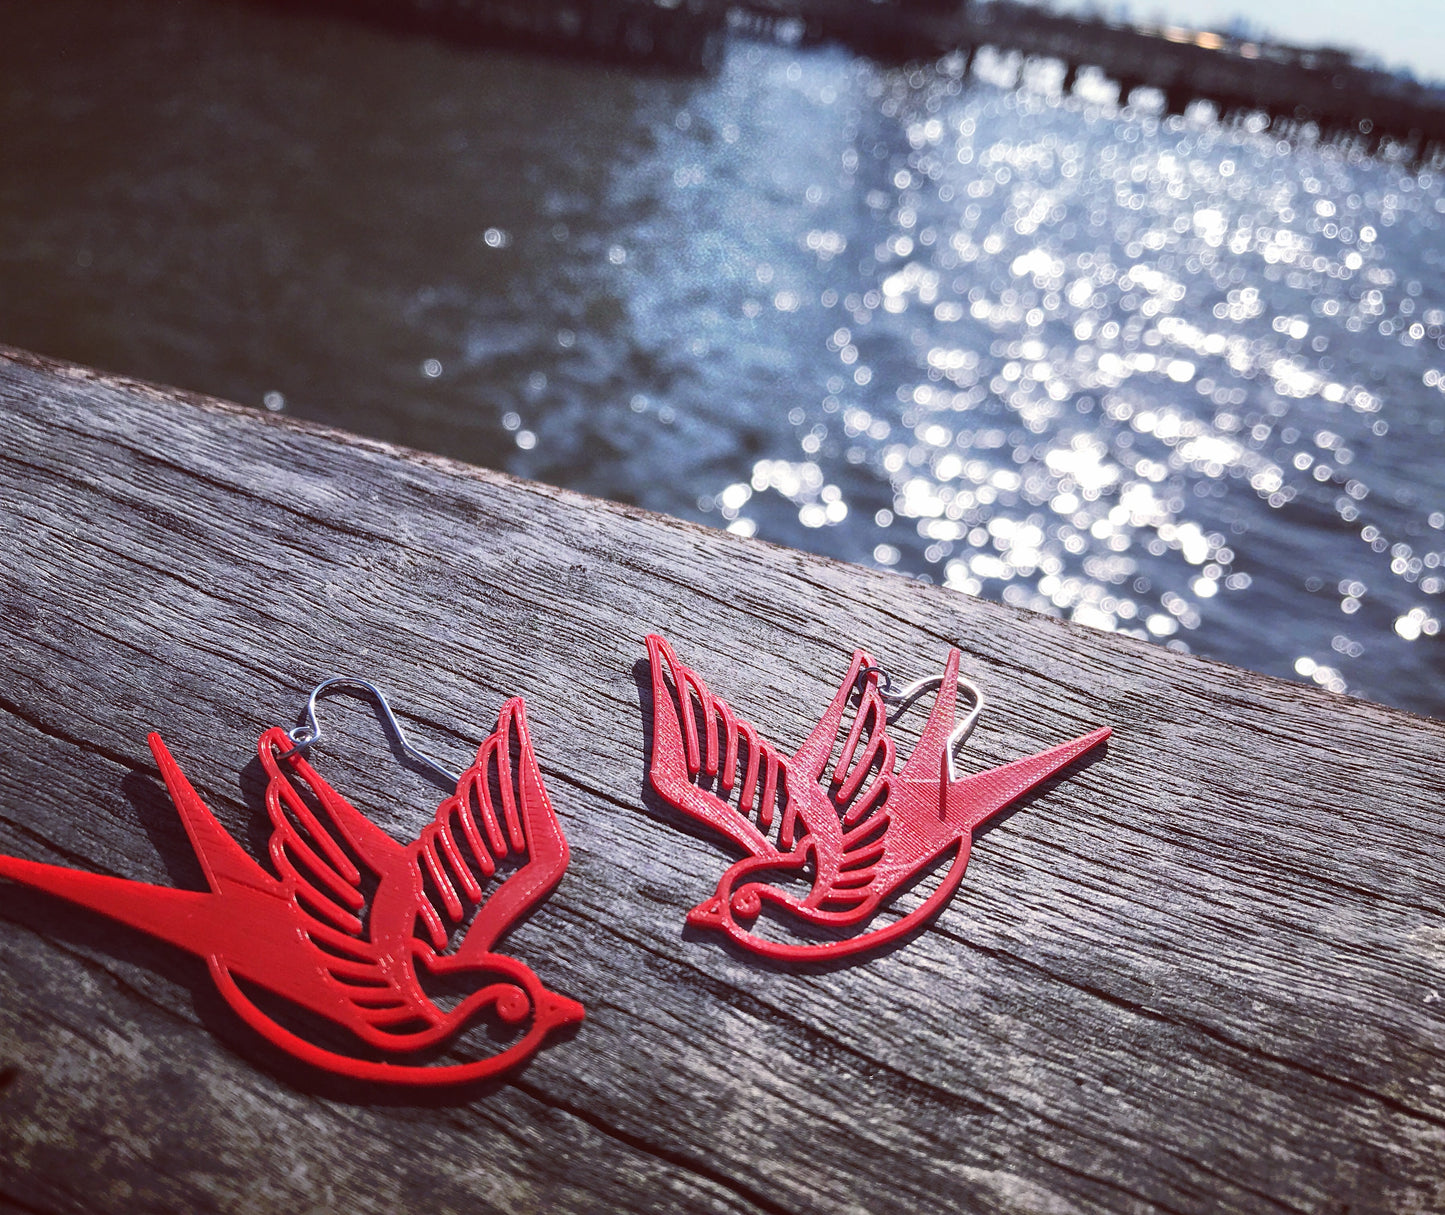 Shown on a wooden pier with the shimmering water in the background are two 3D printed R+D earrings. They are a bright fire engine red color and shaped like  swallows or sparrows. The birds are a classic look like sailor tattoos that mark one's journey. 